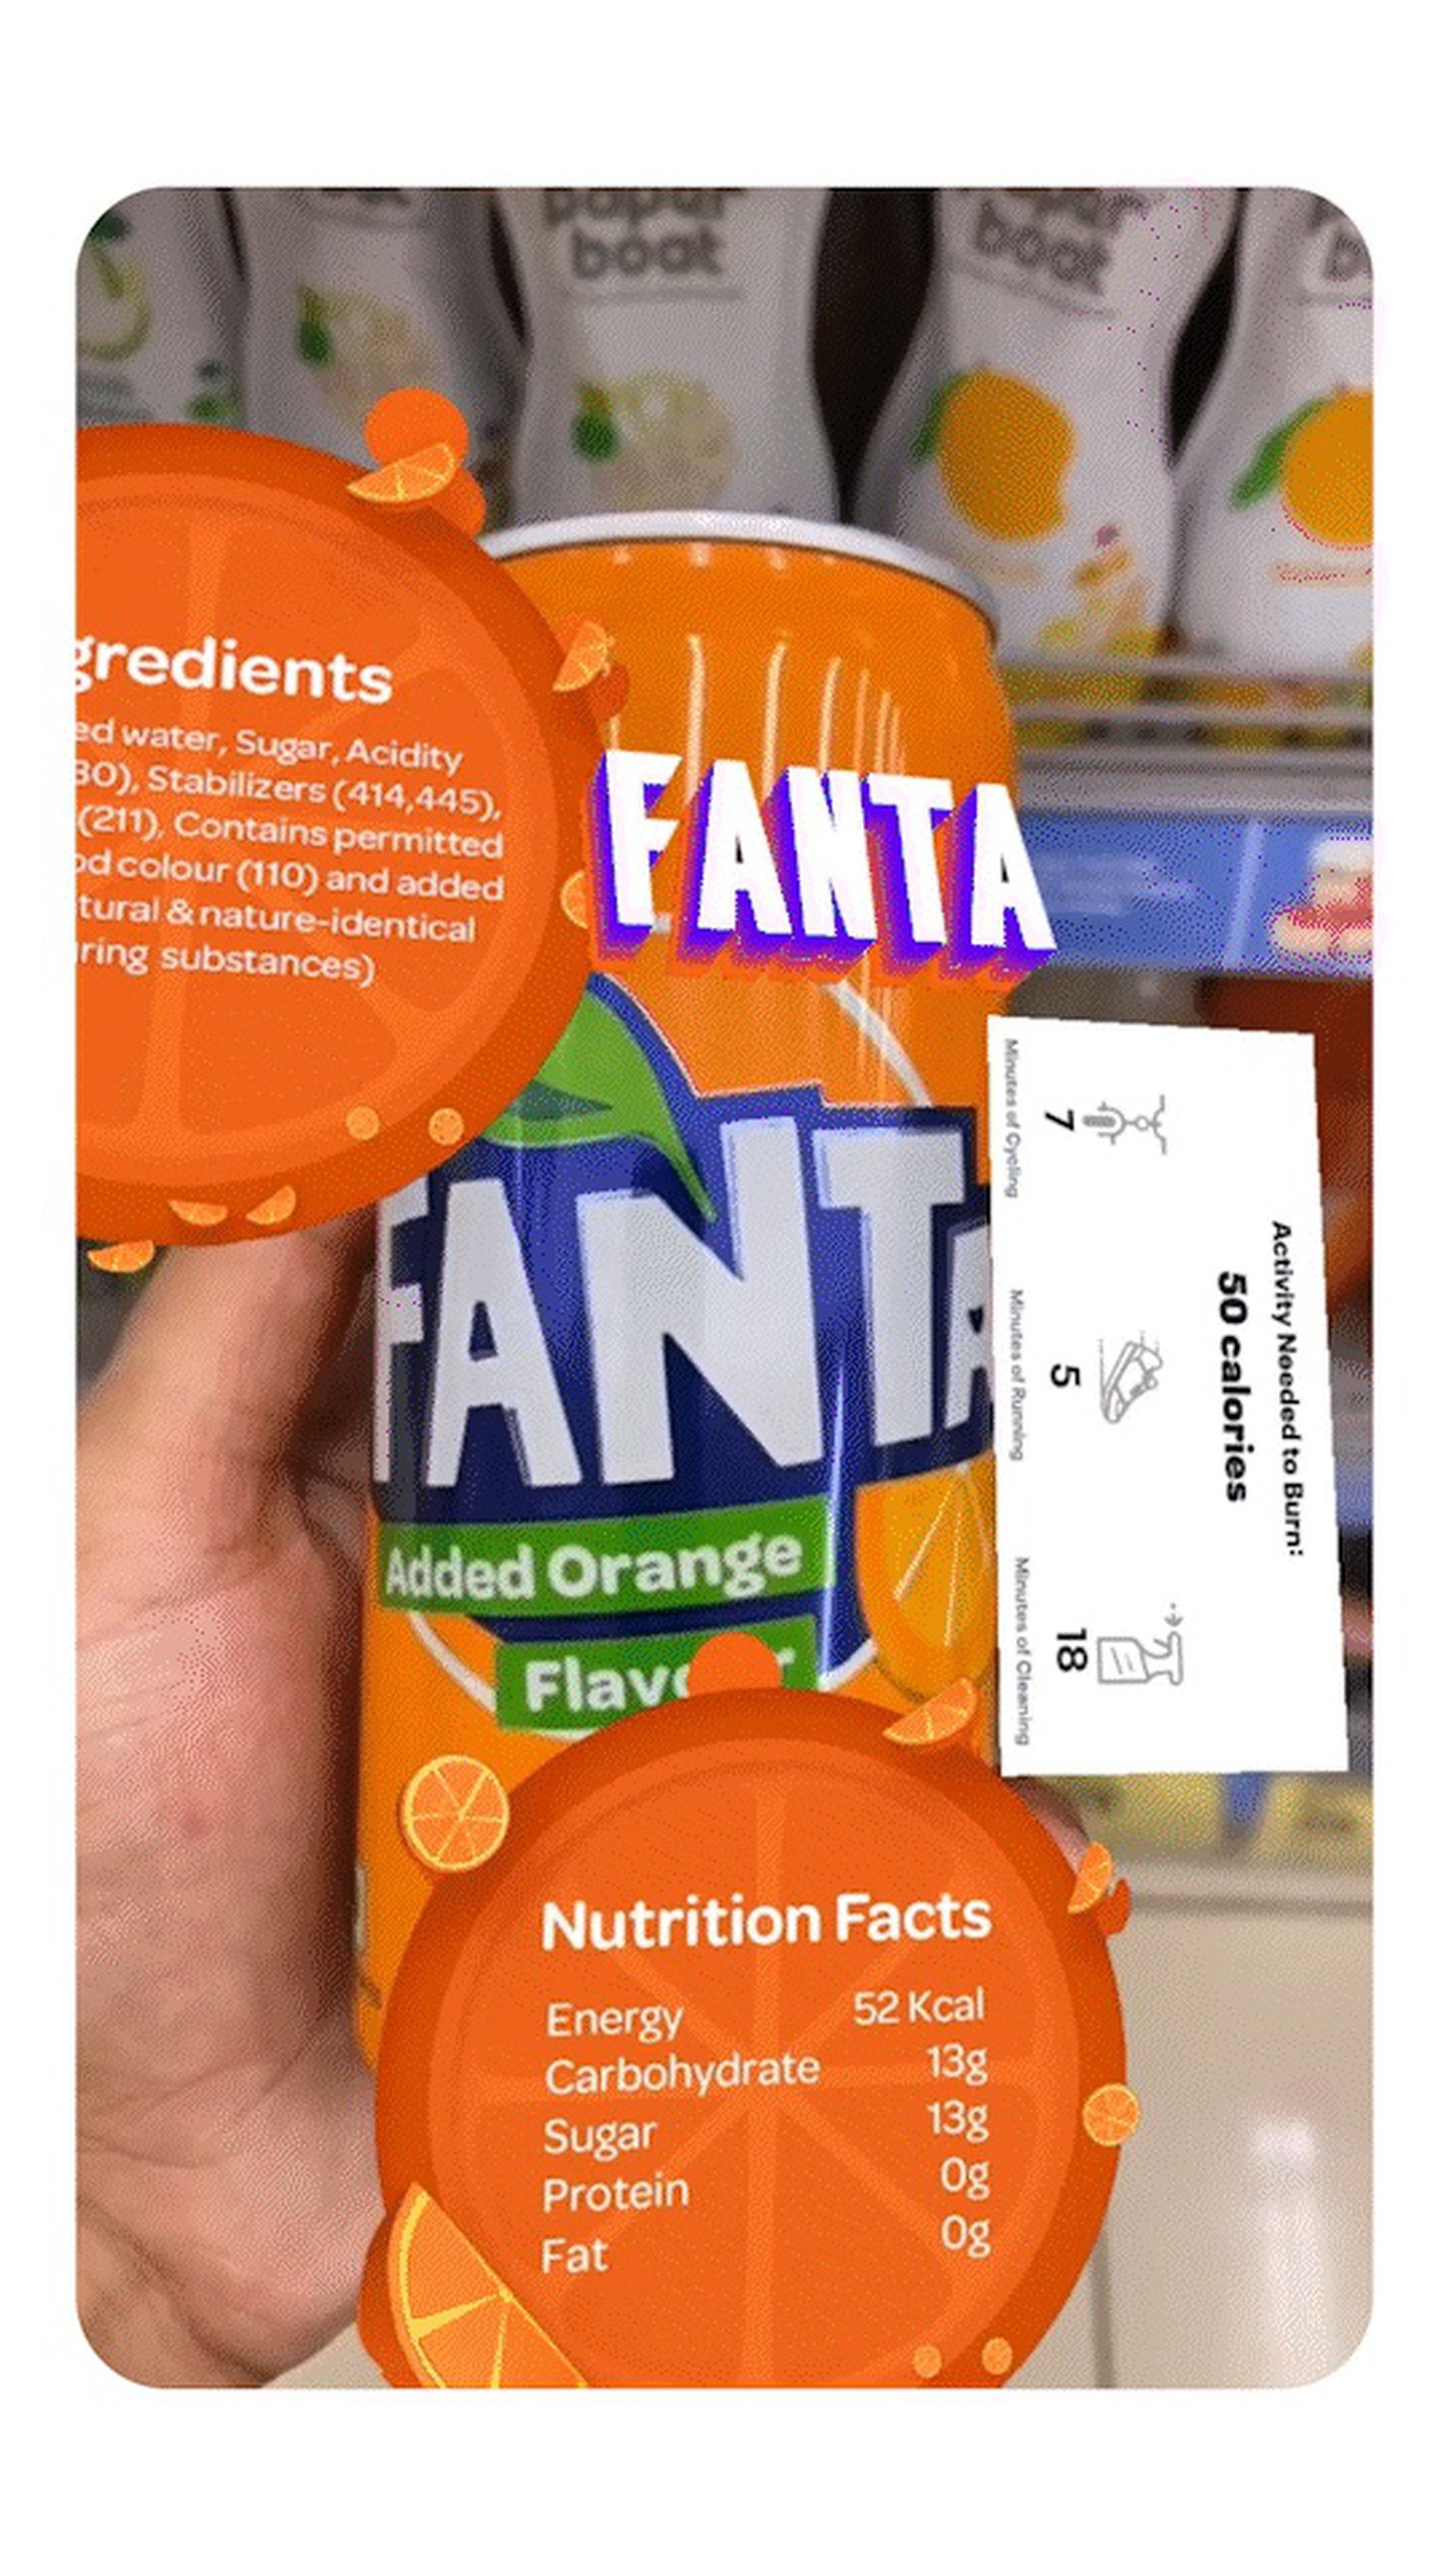 A fanta can with virtual ingredients and nutrition labels appearing around the physical can.